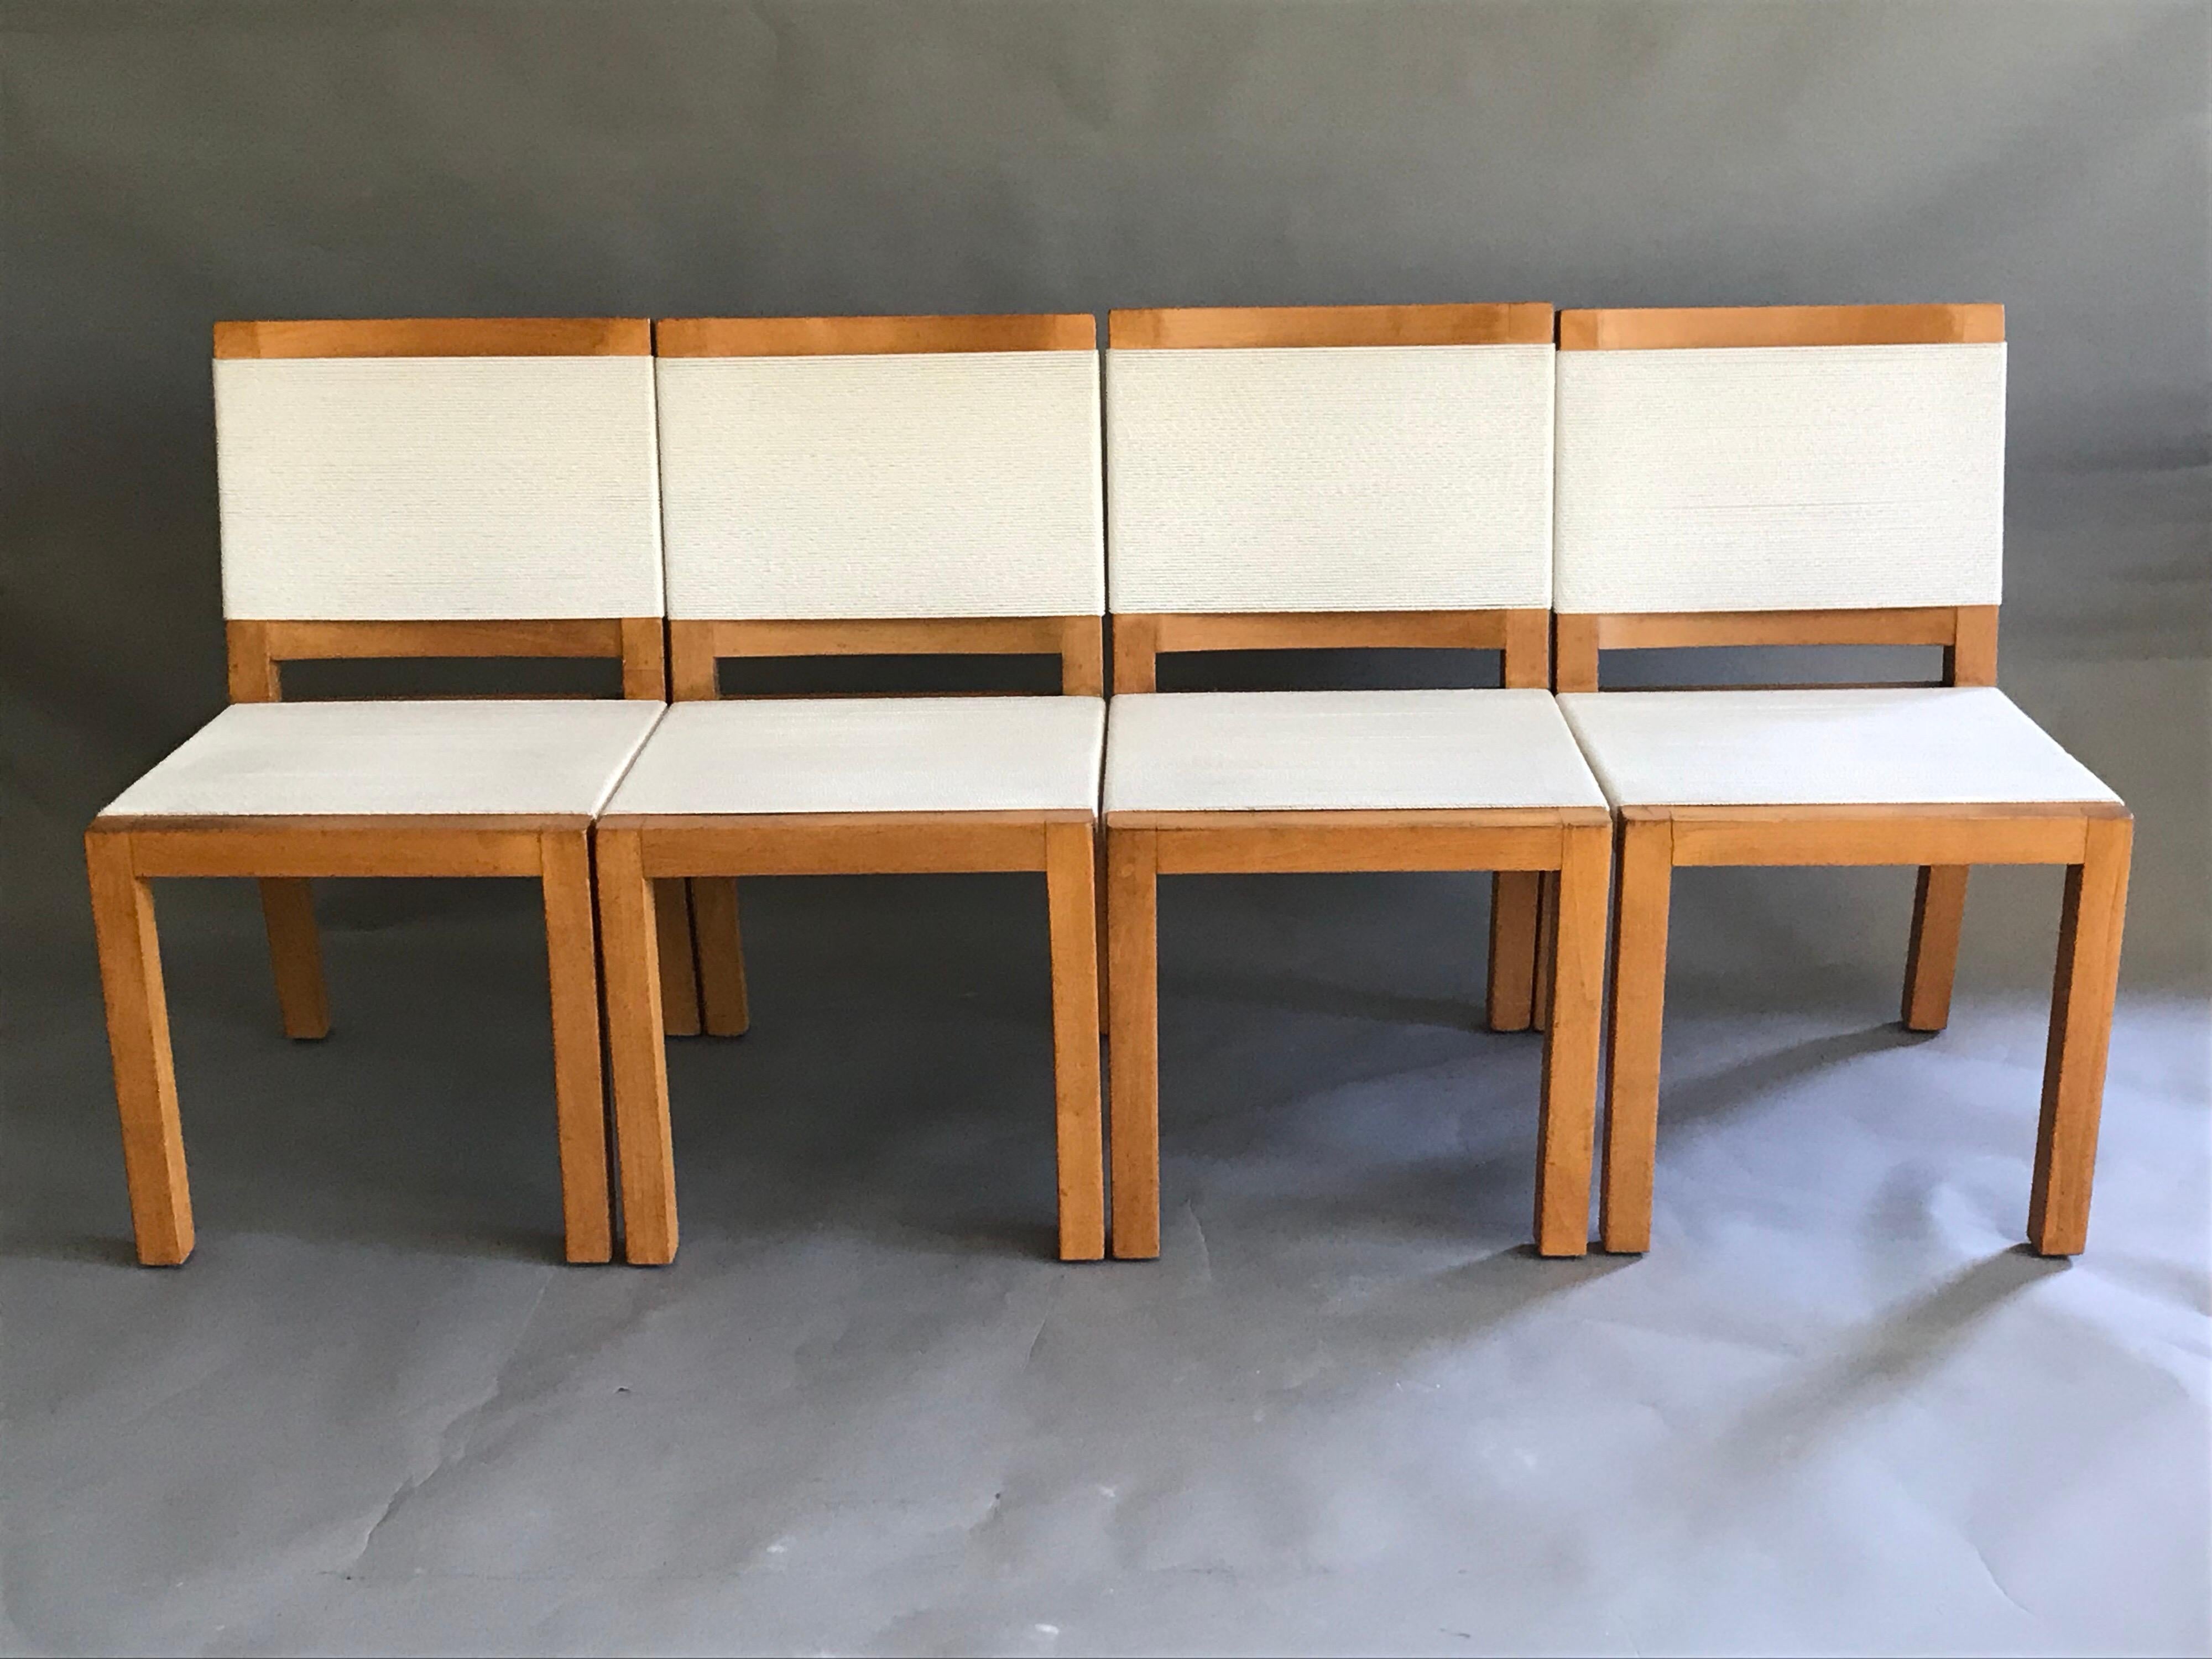 A nice set of early California modern architectural designs.
They were ahead of their time 60 years ago, and are still current today.
These were designed and sold out of the Van Keppel-Green show-room in Beverly Hills.
They are made of birch wood,